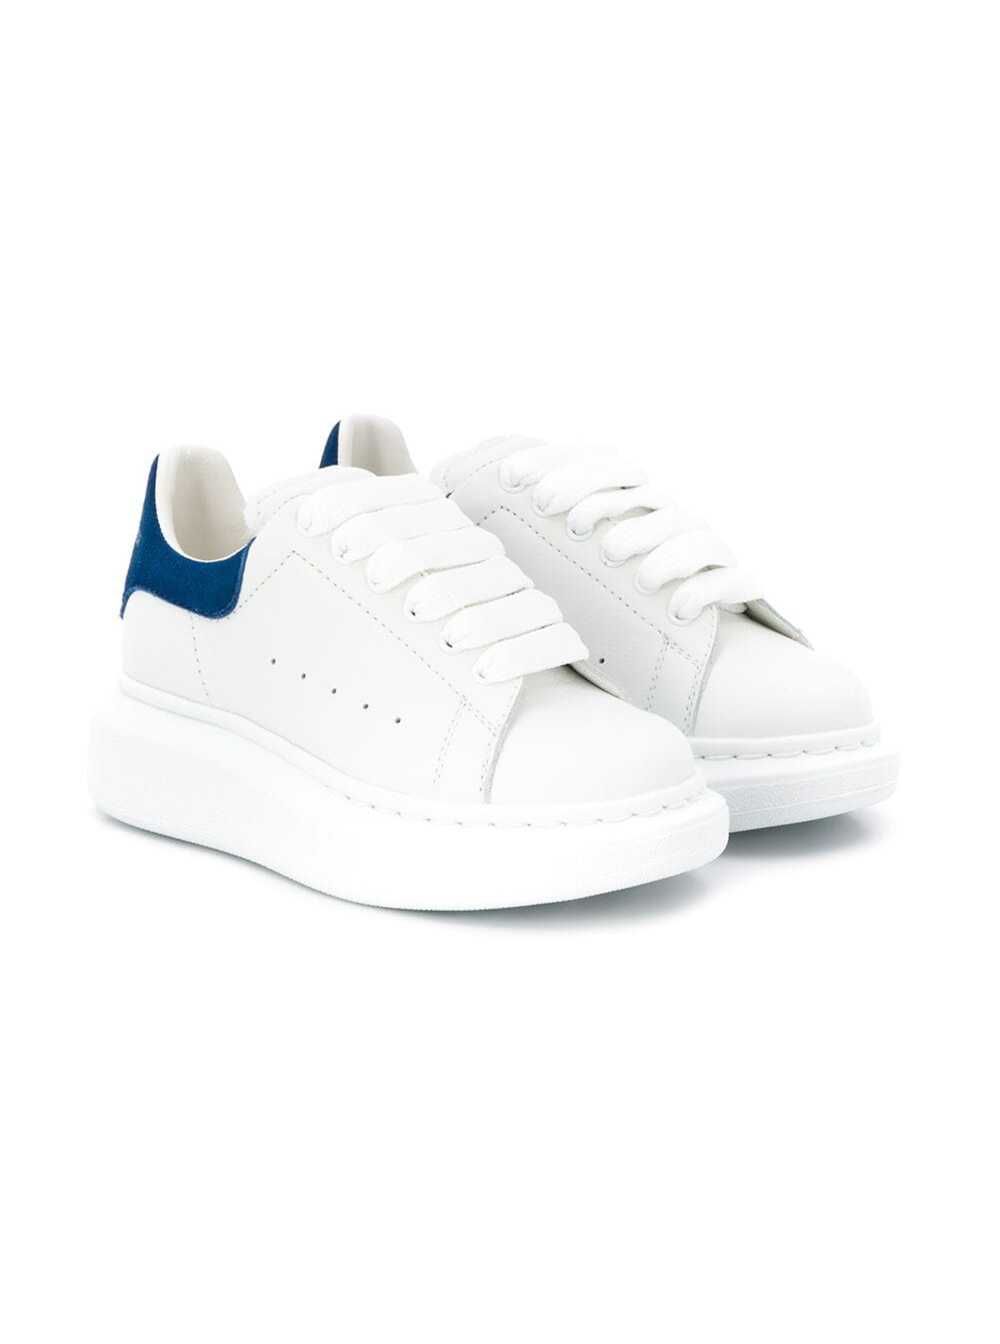 Alexander McQueen White Leather Oversize Sneakers With Blue Heel Tab